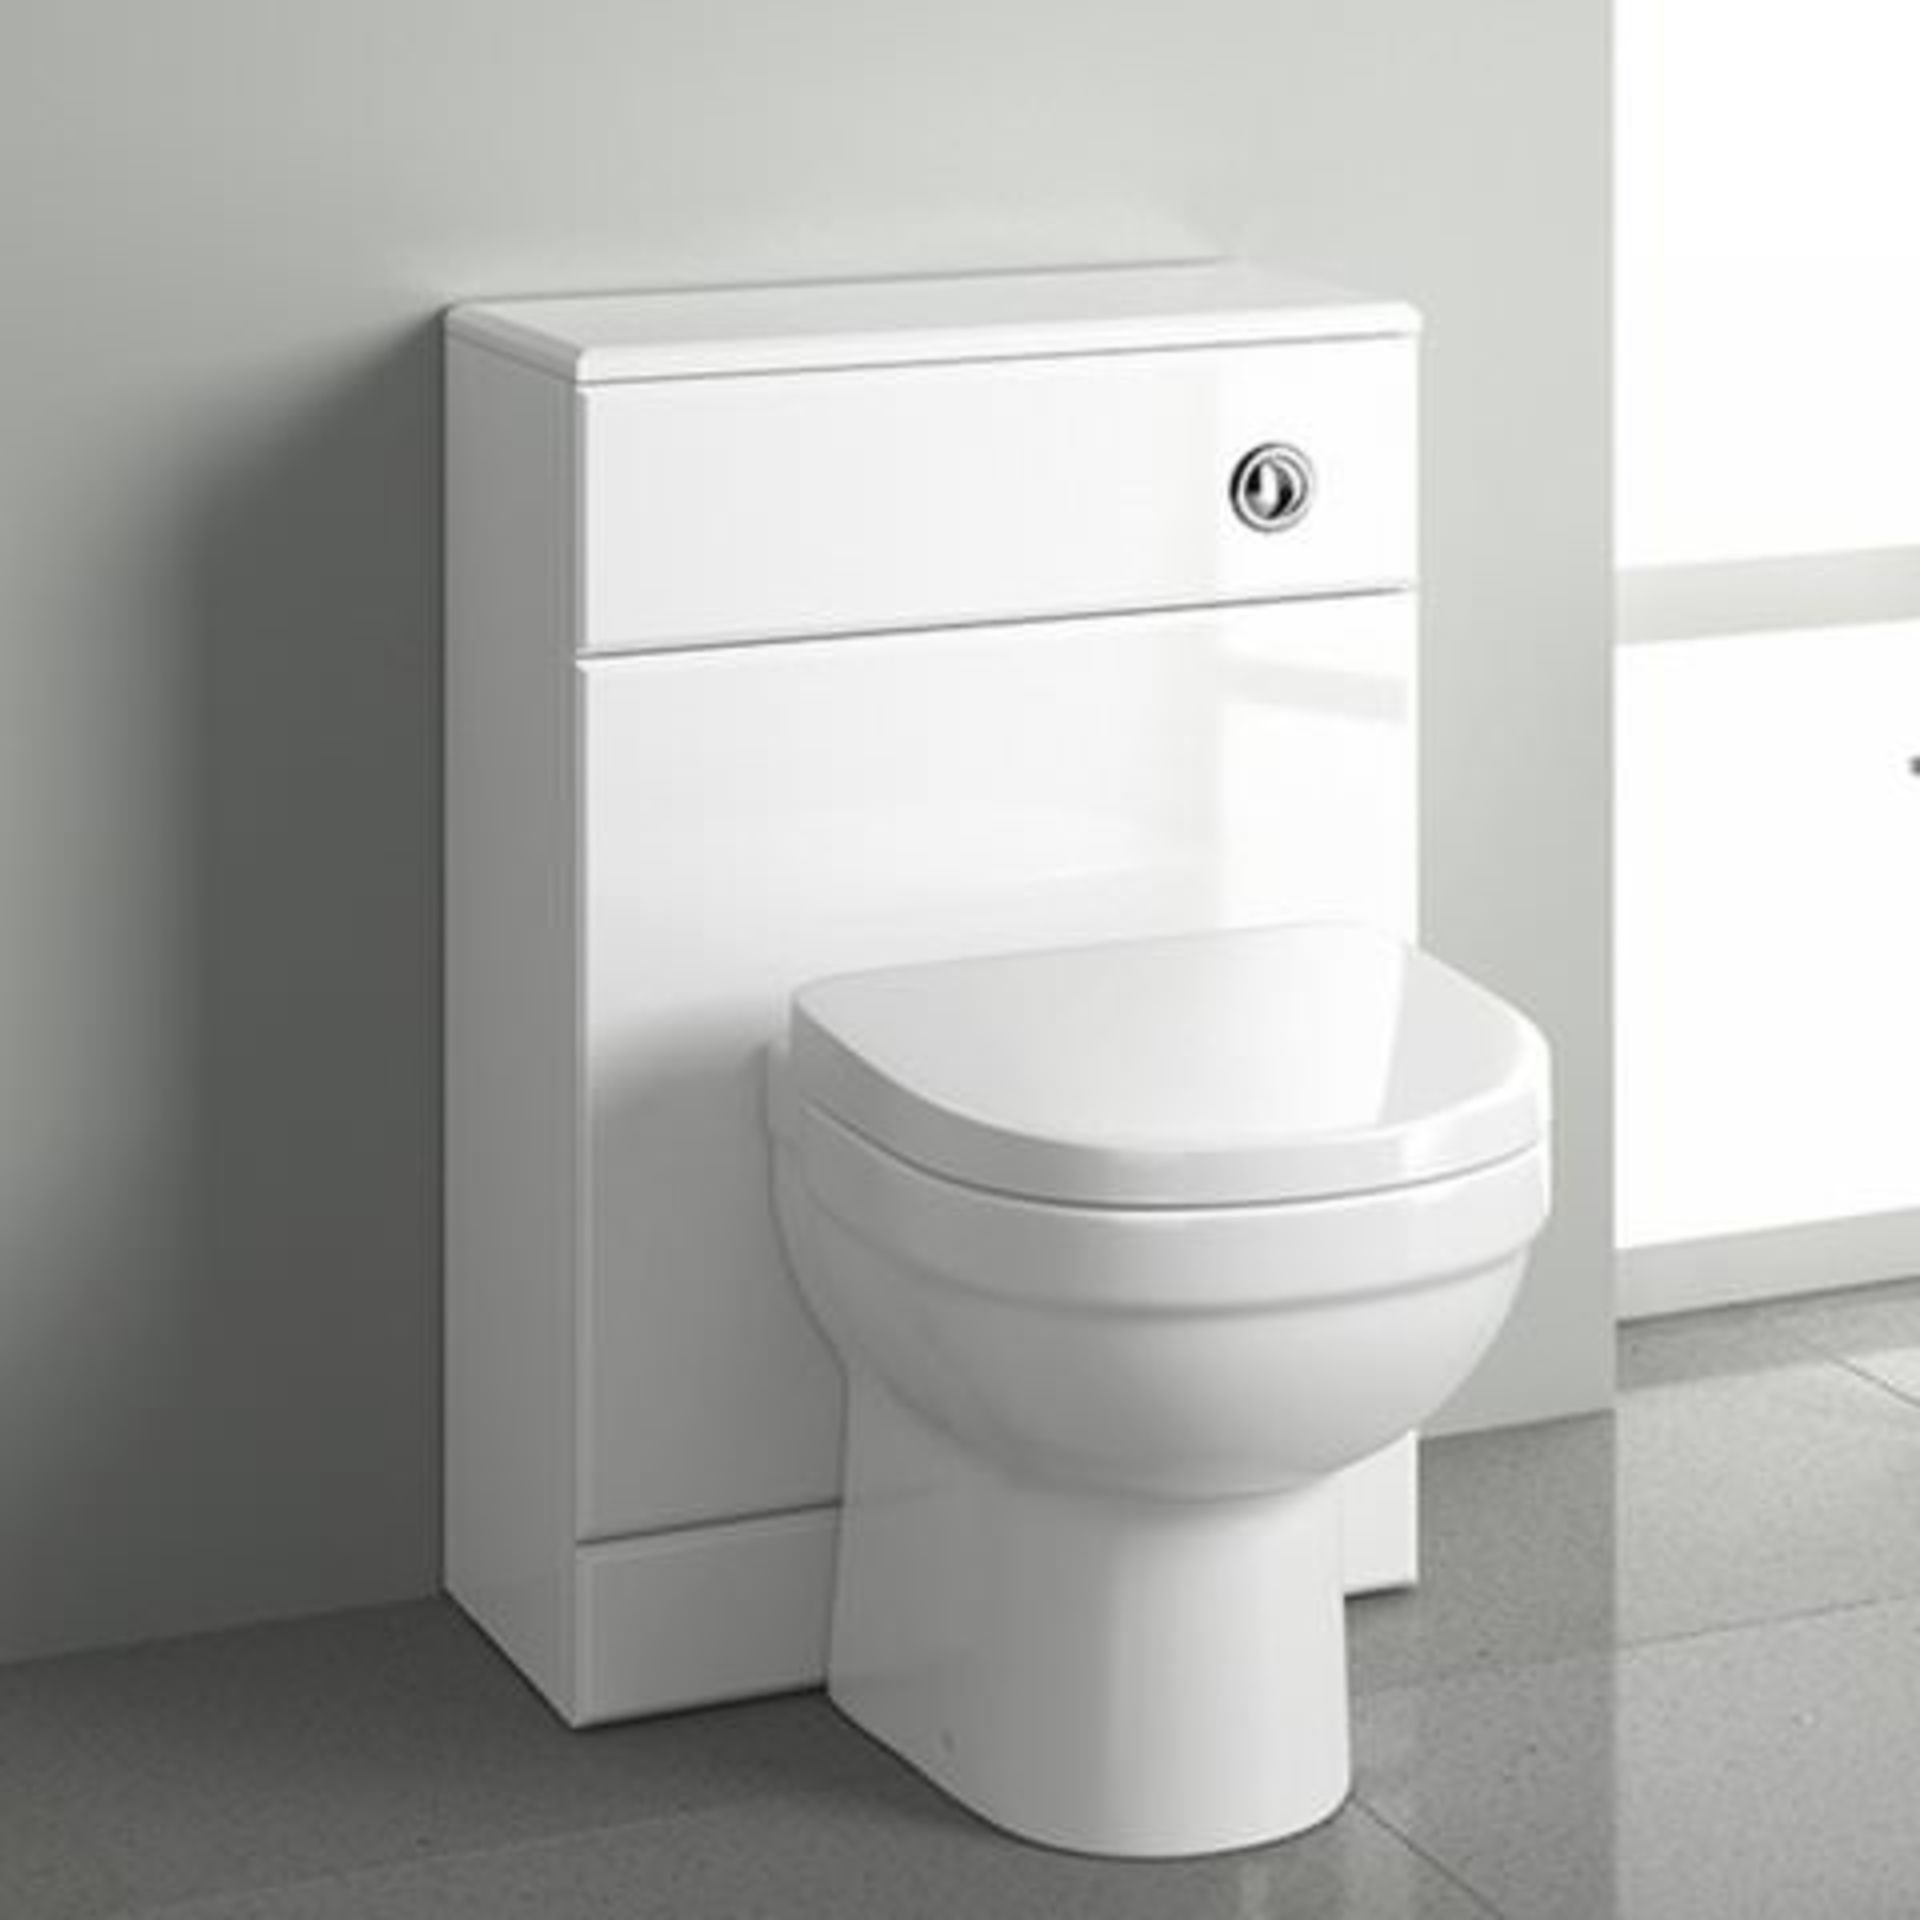 (AA19) 500x300mm Quartz Gloss White Back To Wall Toilet Unit. RRP £143.99. This beautifully produced